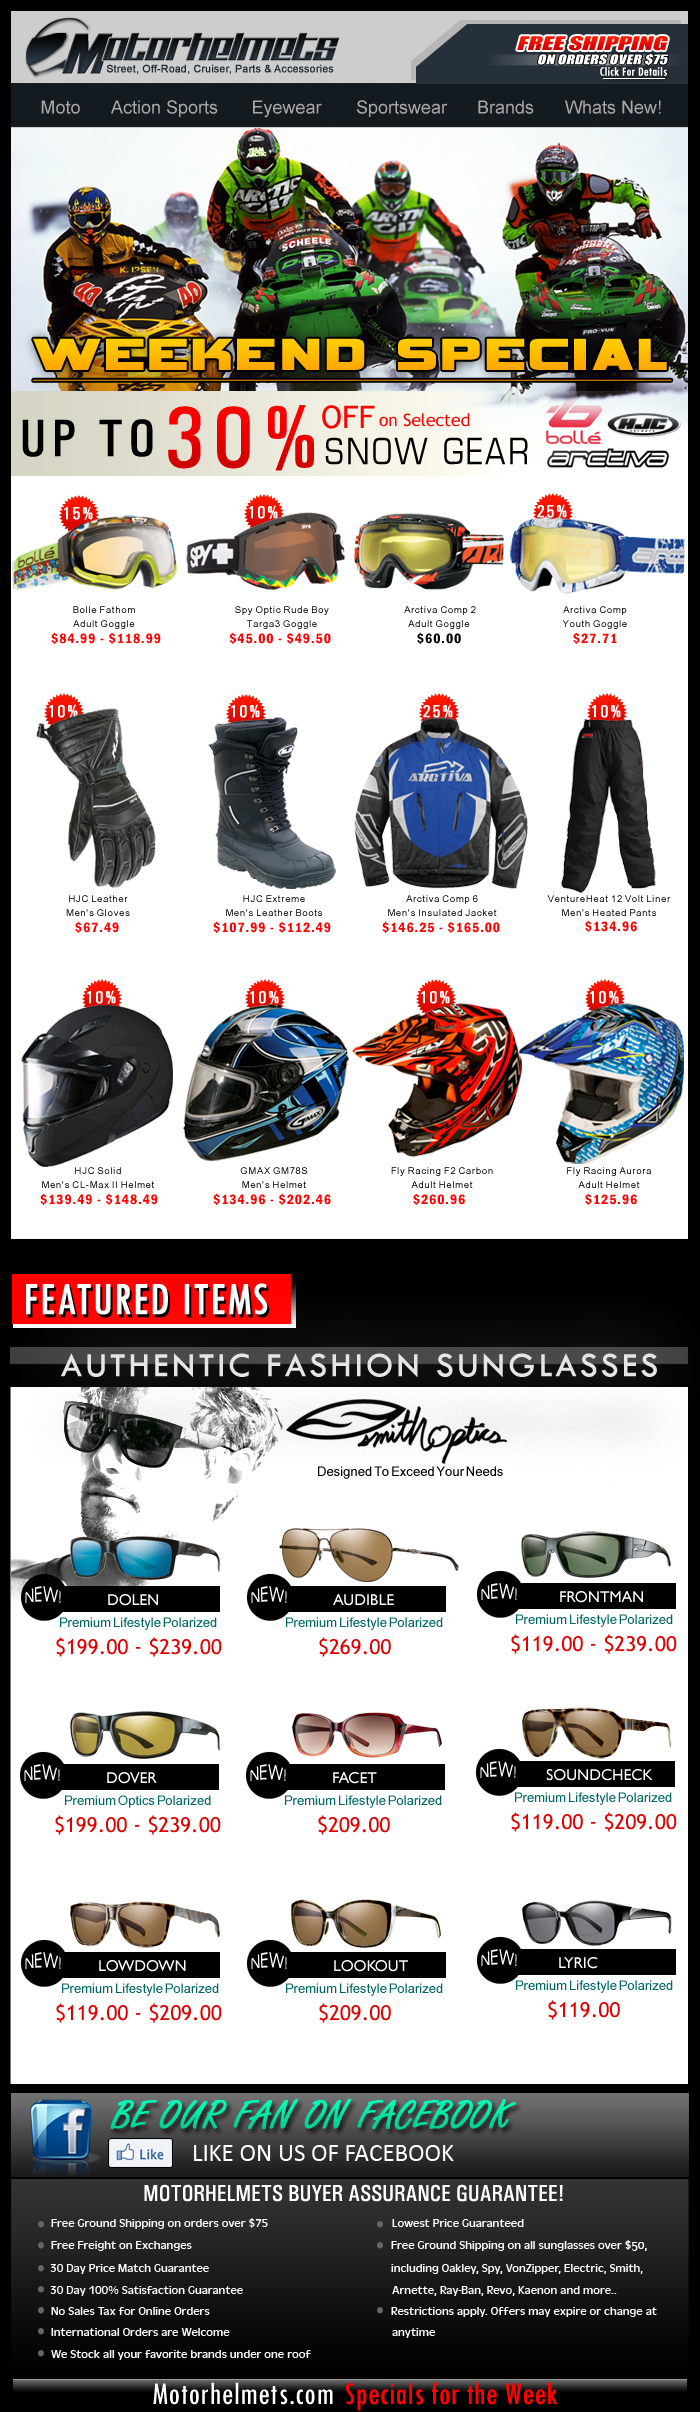 Save 10% off on every purchase of the 2014 Shoei MX & Street Helmets!